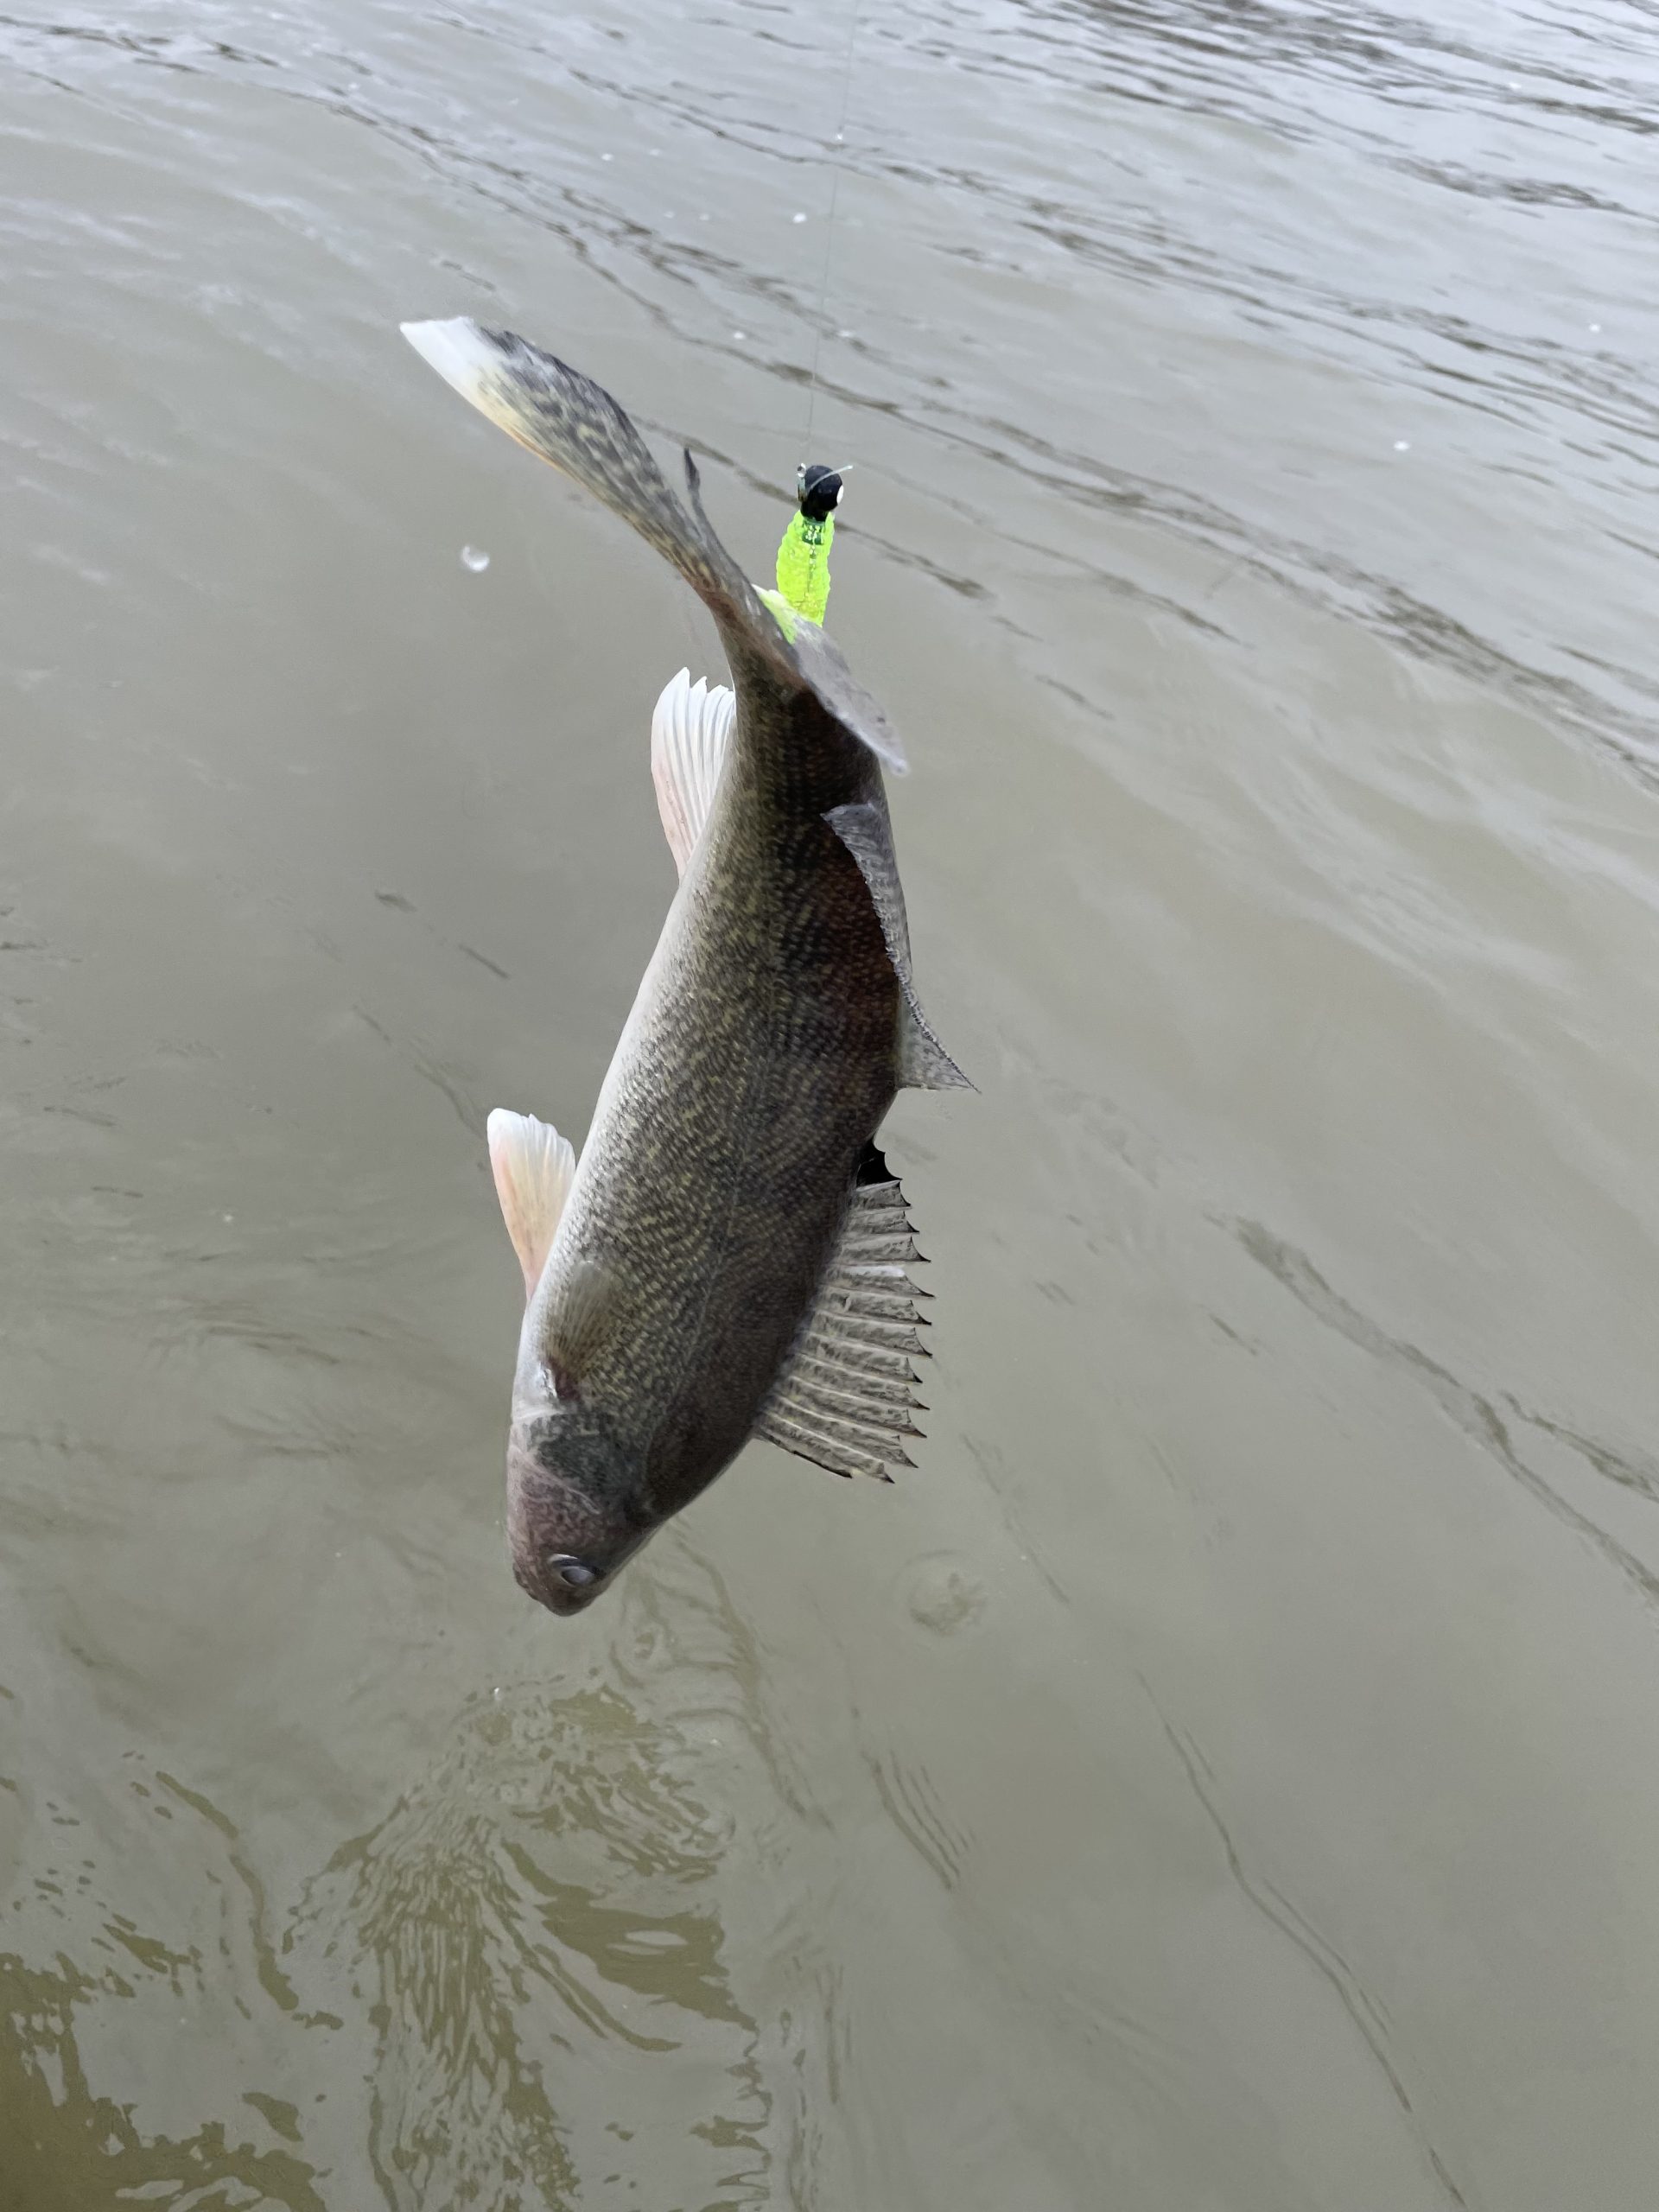 Maumee river report- 18 march 2023